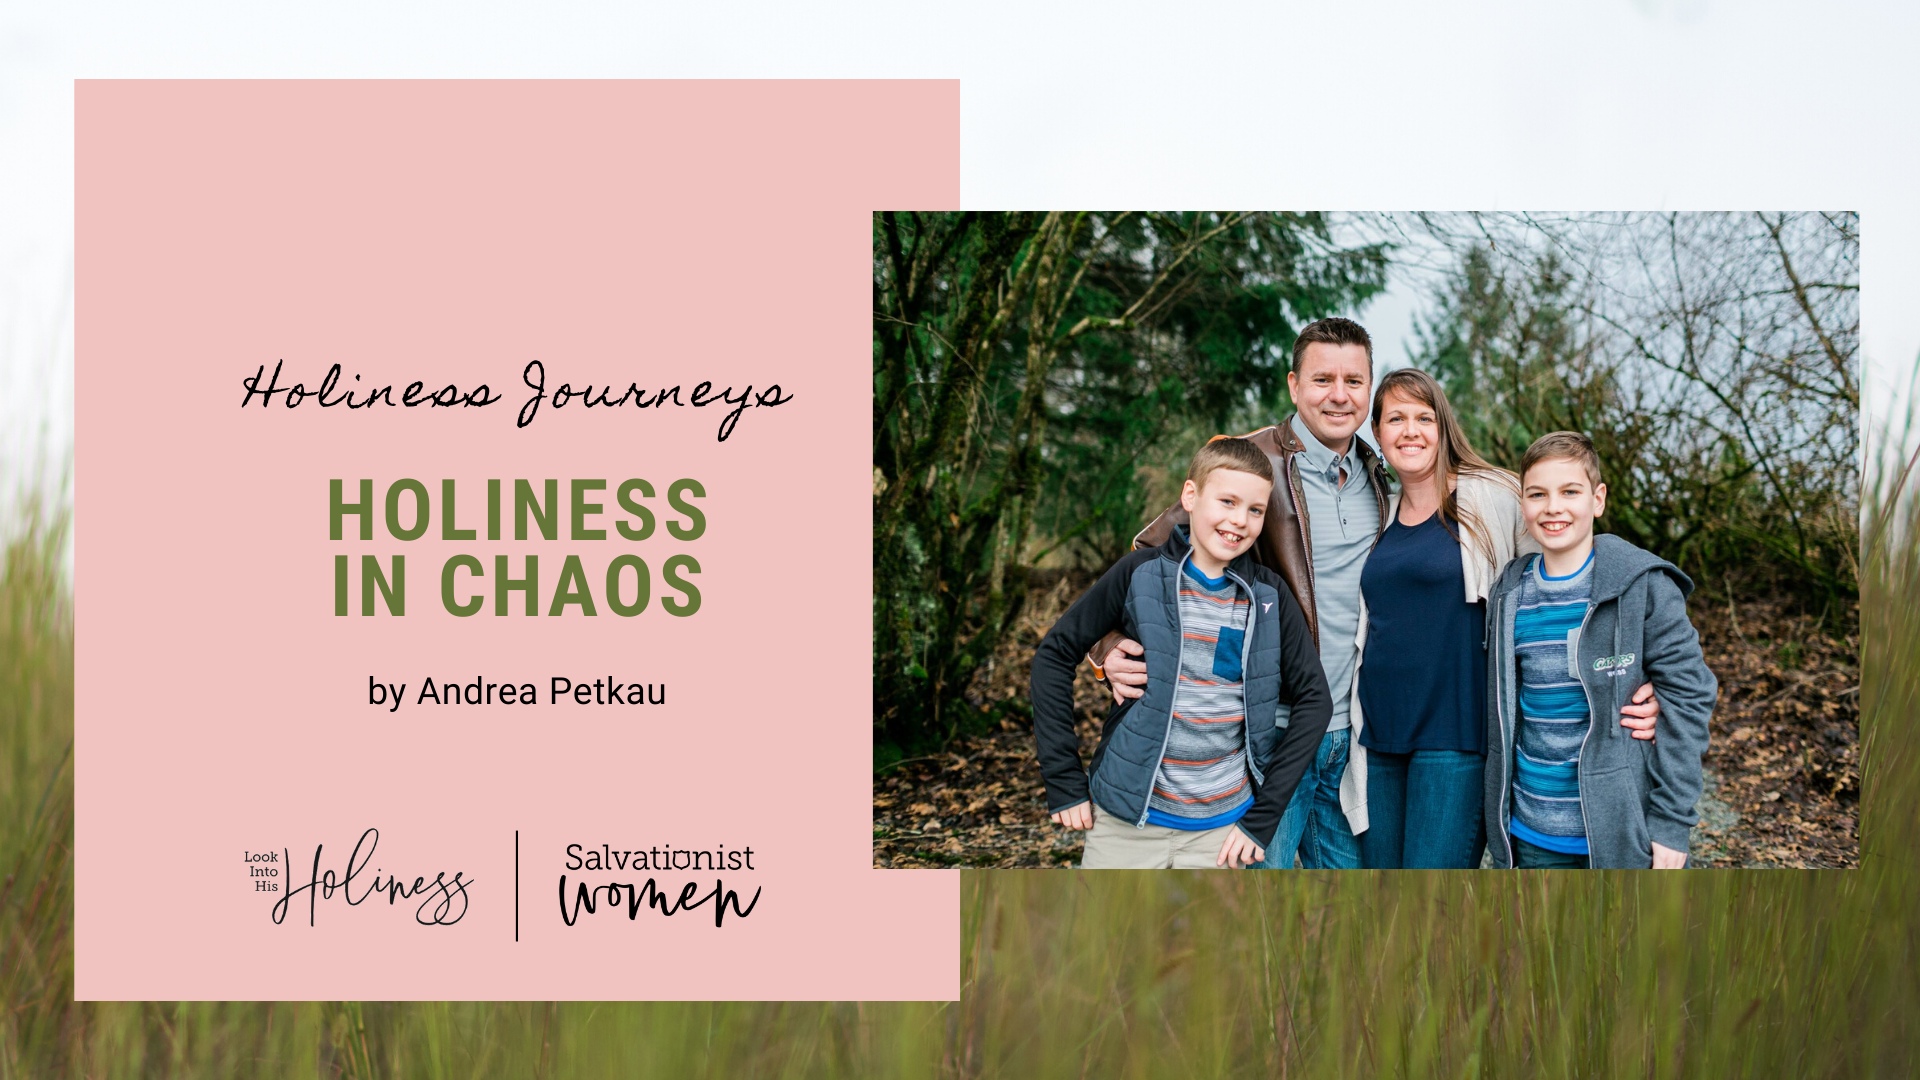 Holiness Journeys: Holiness in Chaos